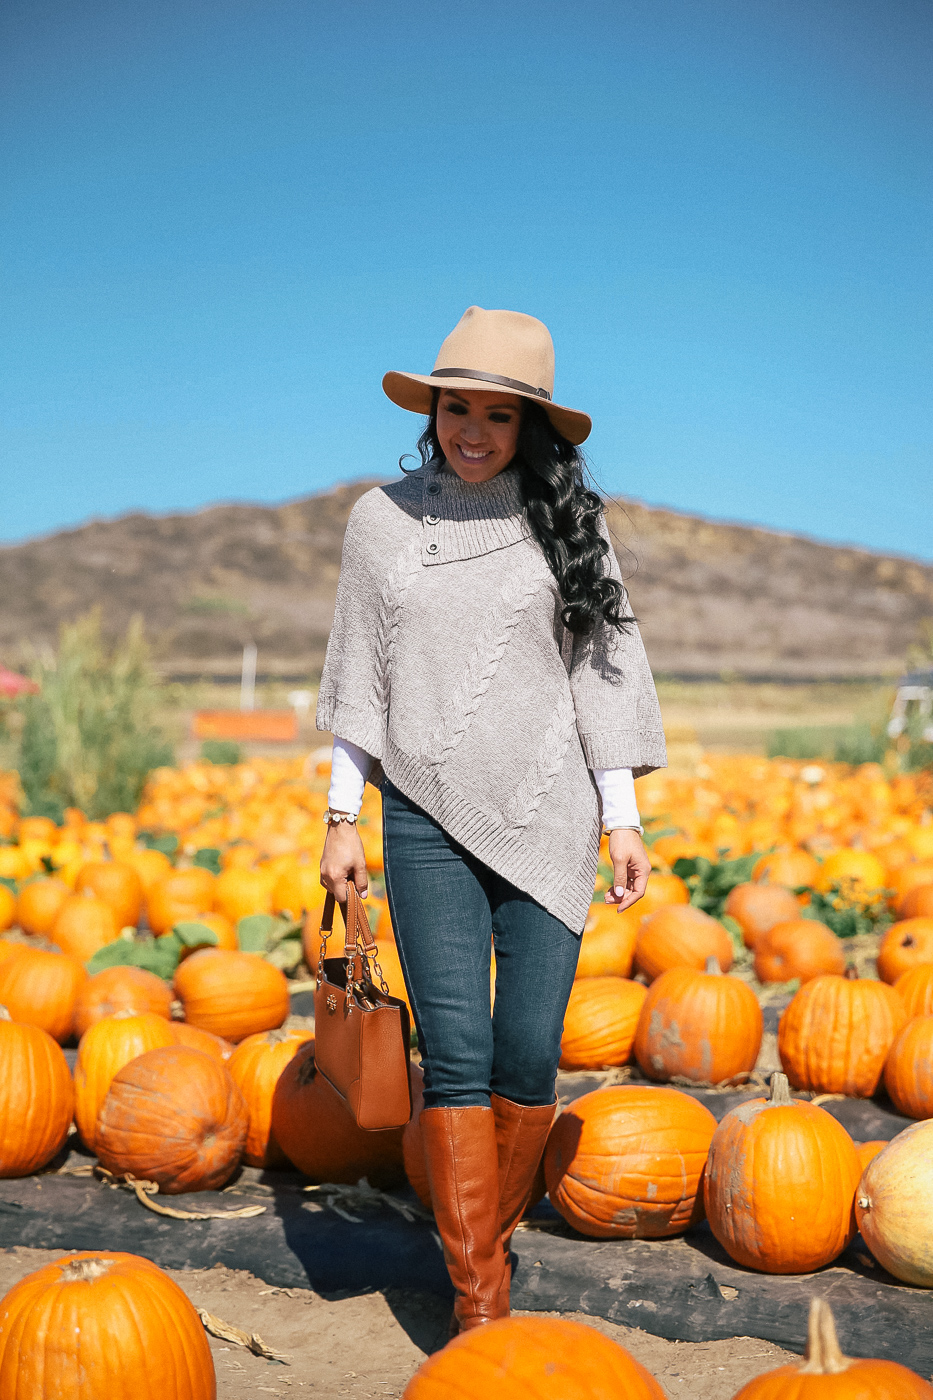 petite poncho skinny jeans cognac boots wool hat fall outfit